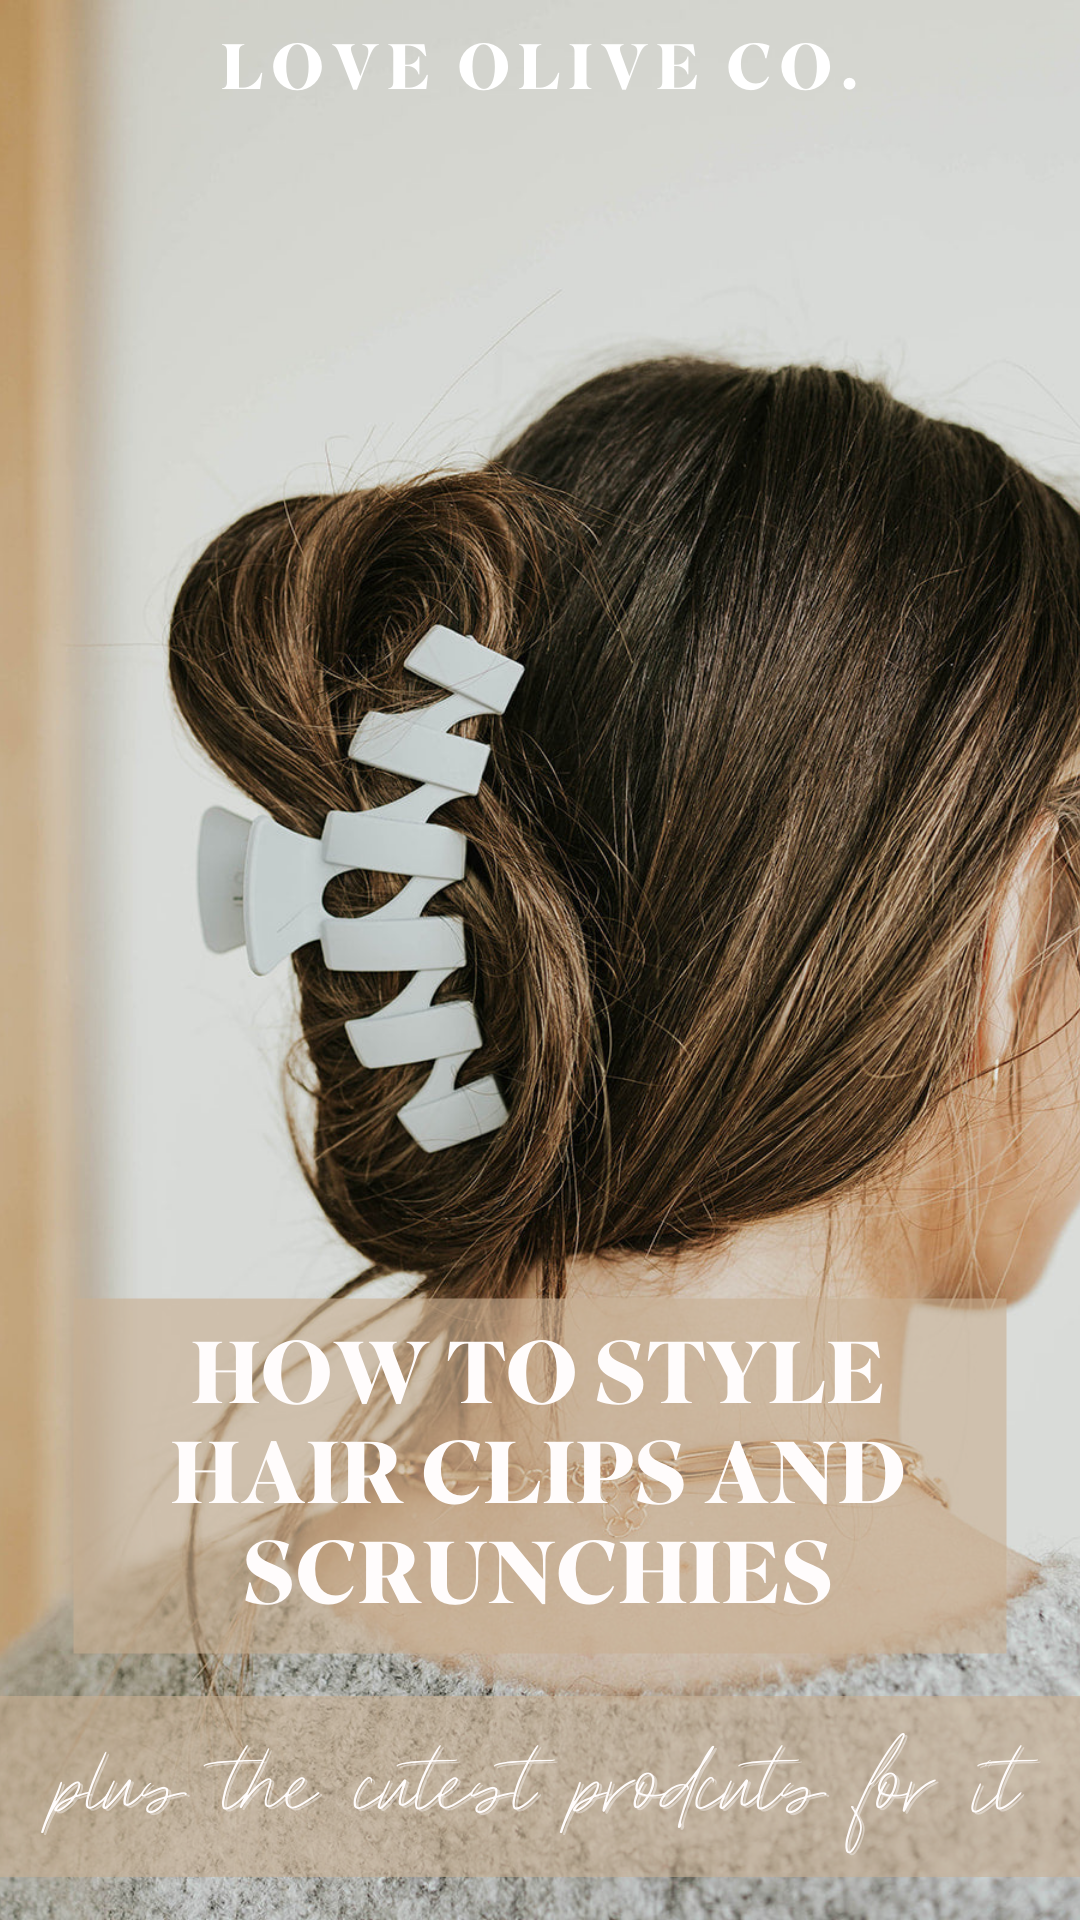 how to style hair clips and scrunchies. www.loveoliveco.com